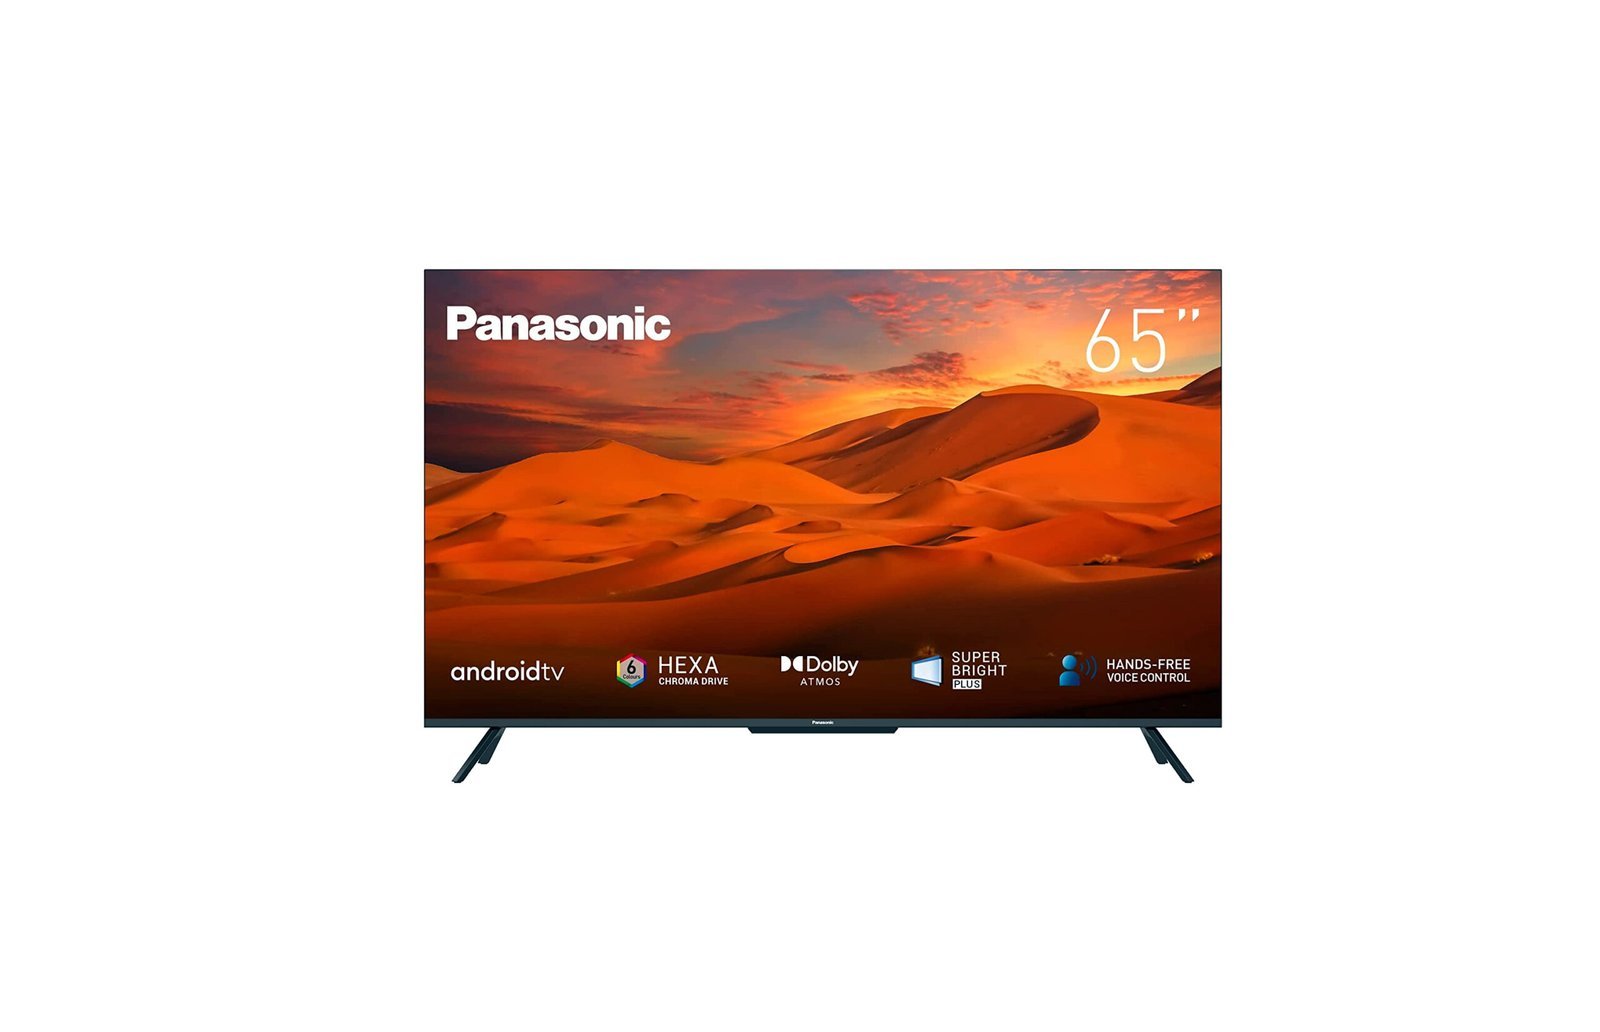 Panasonic 65 Inch Android Smart TV Color Black Model-TH-65JX850M | 1 Year Brand Warranty.